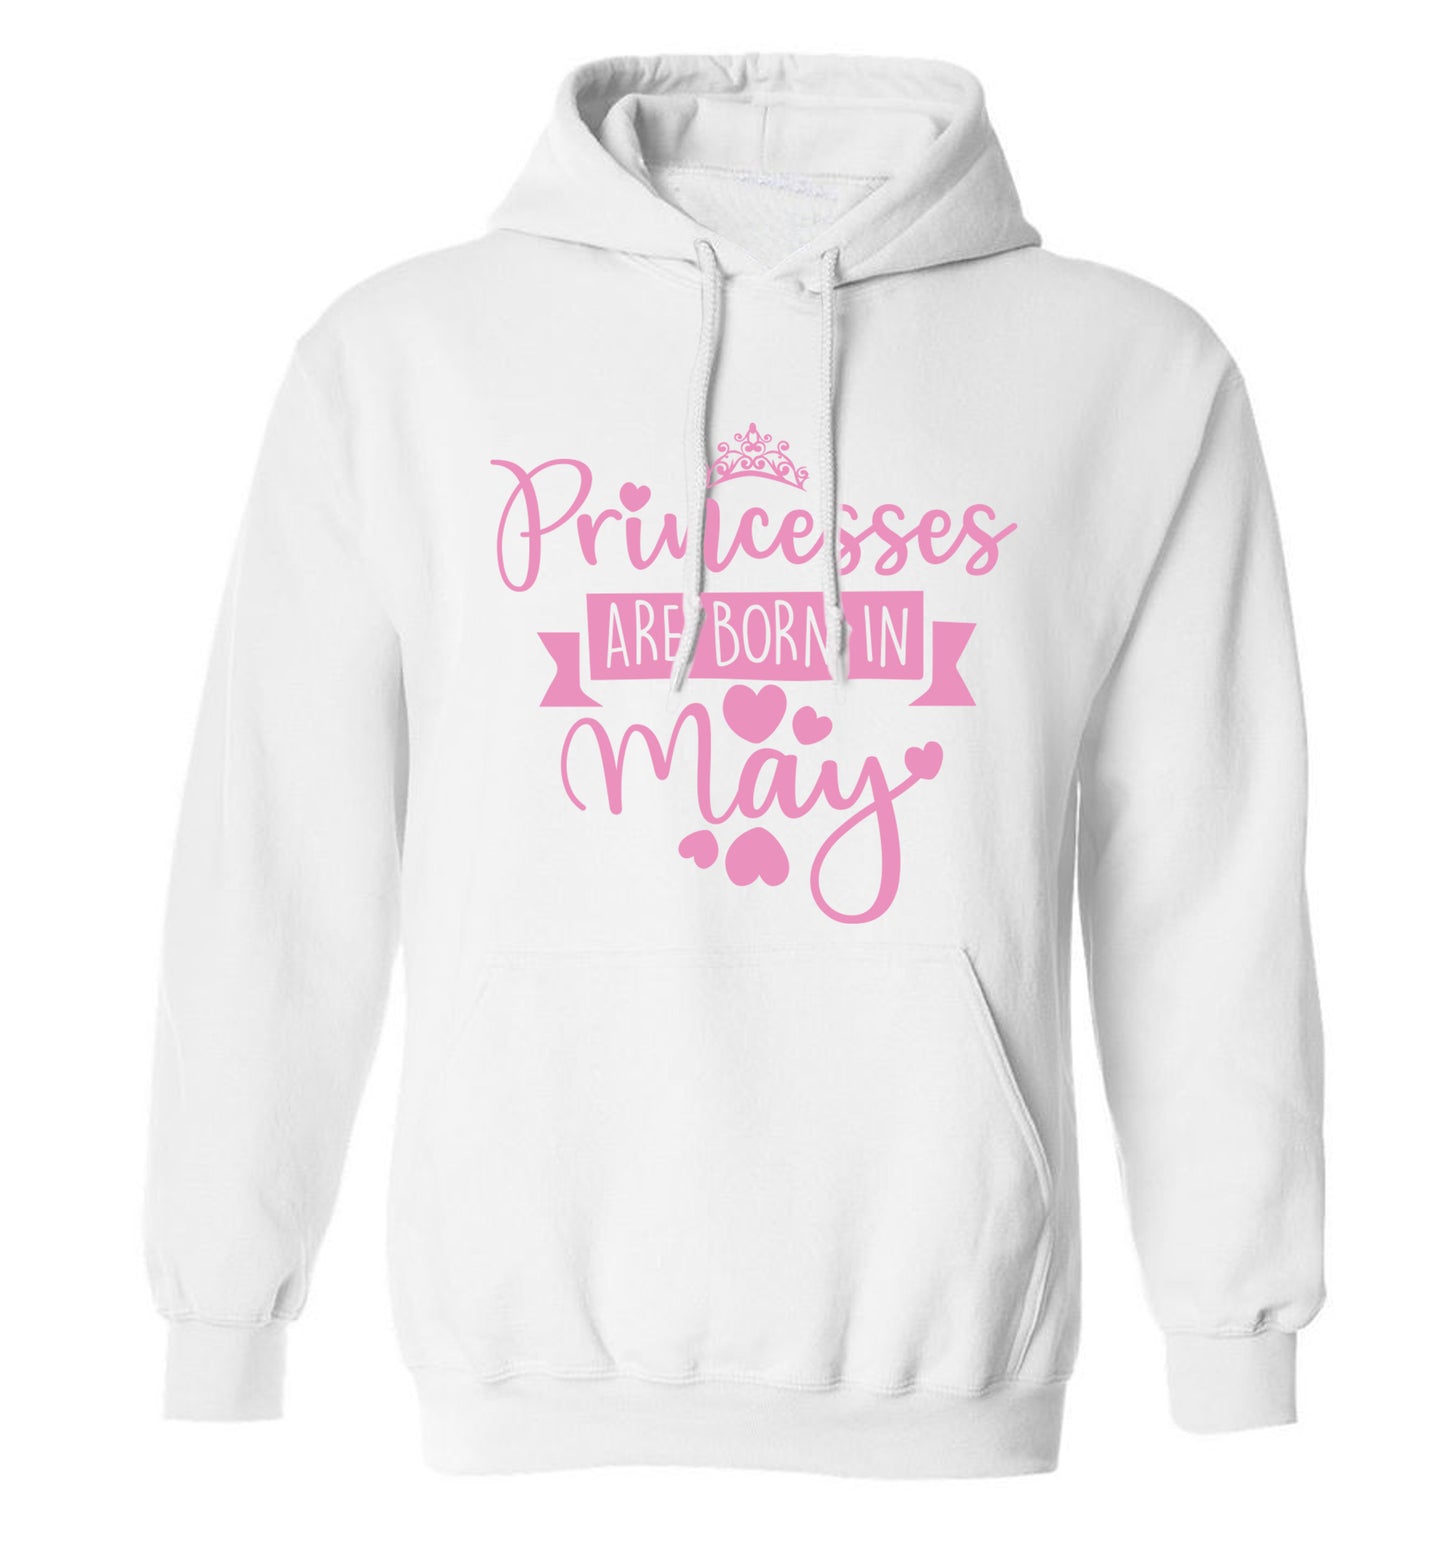 Princesses are born in May adults unisex white hoodie 2XL